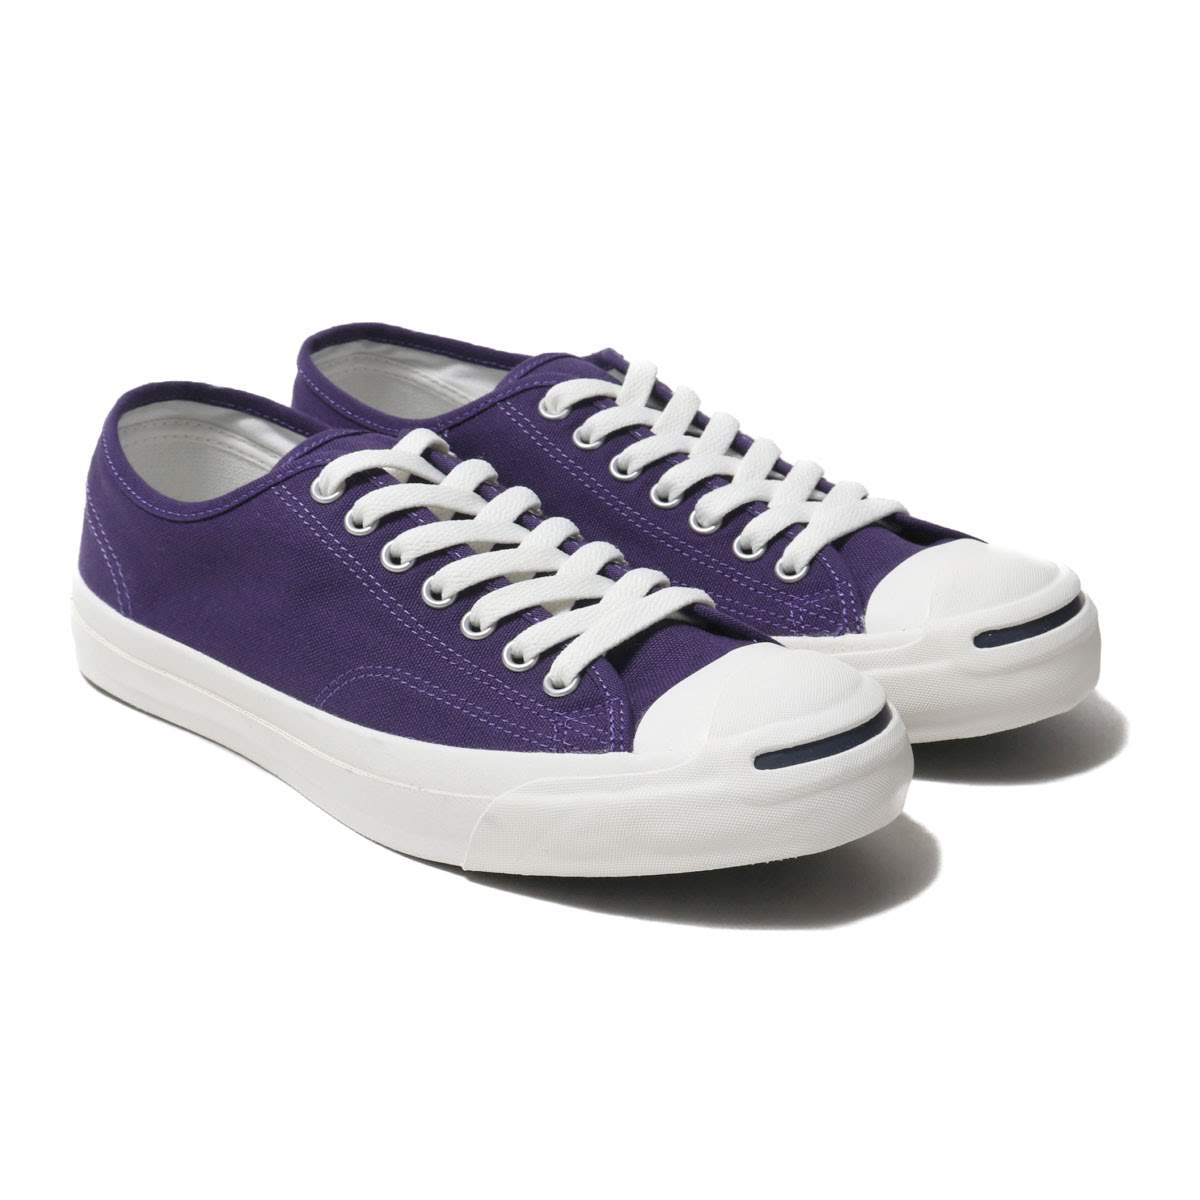 CONVERSE JACK PURCELL COLORS RH 